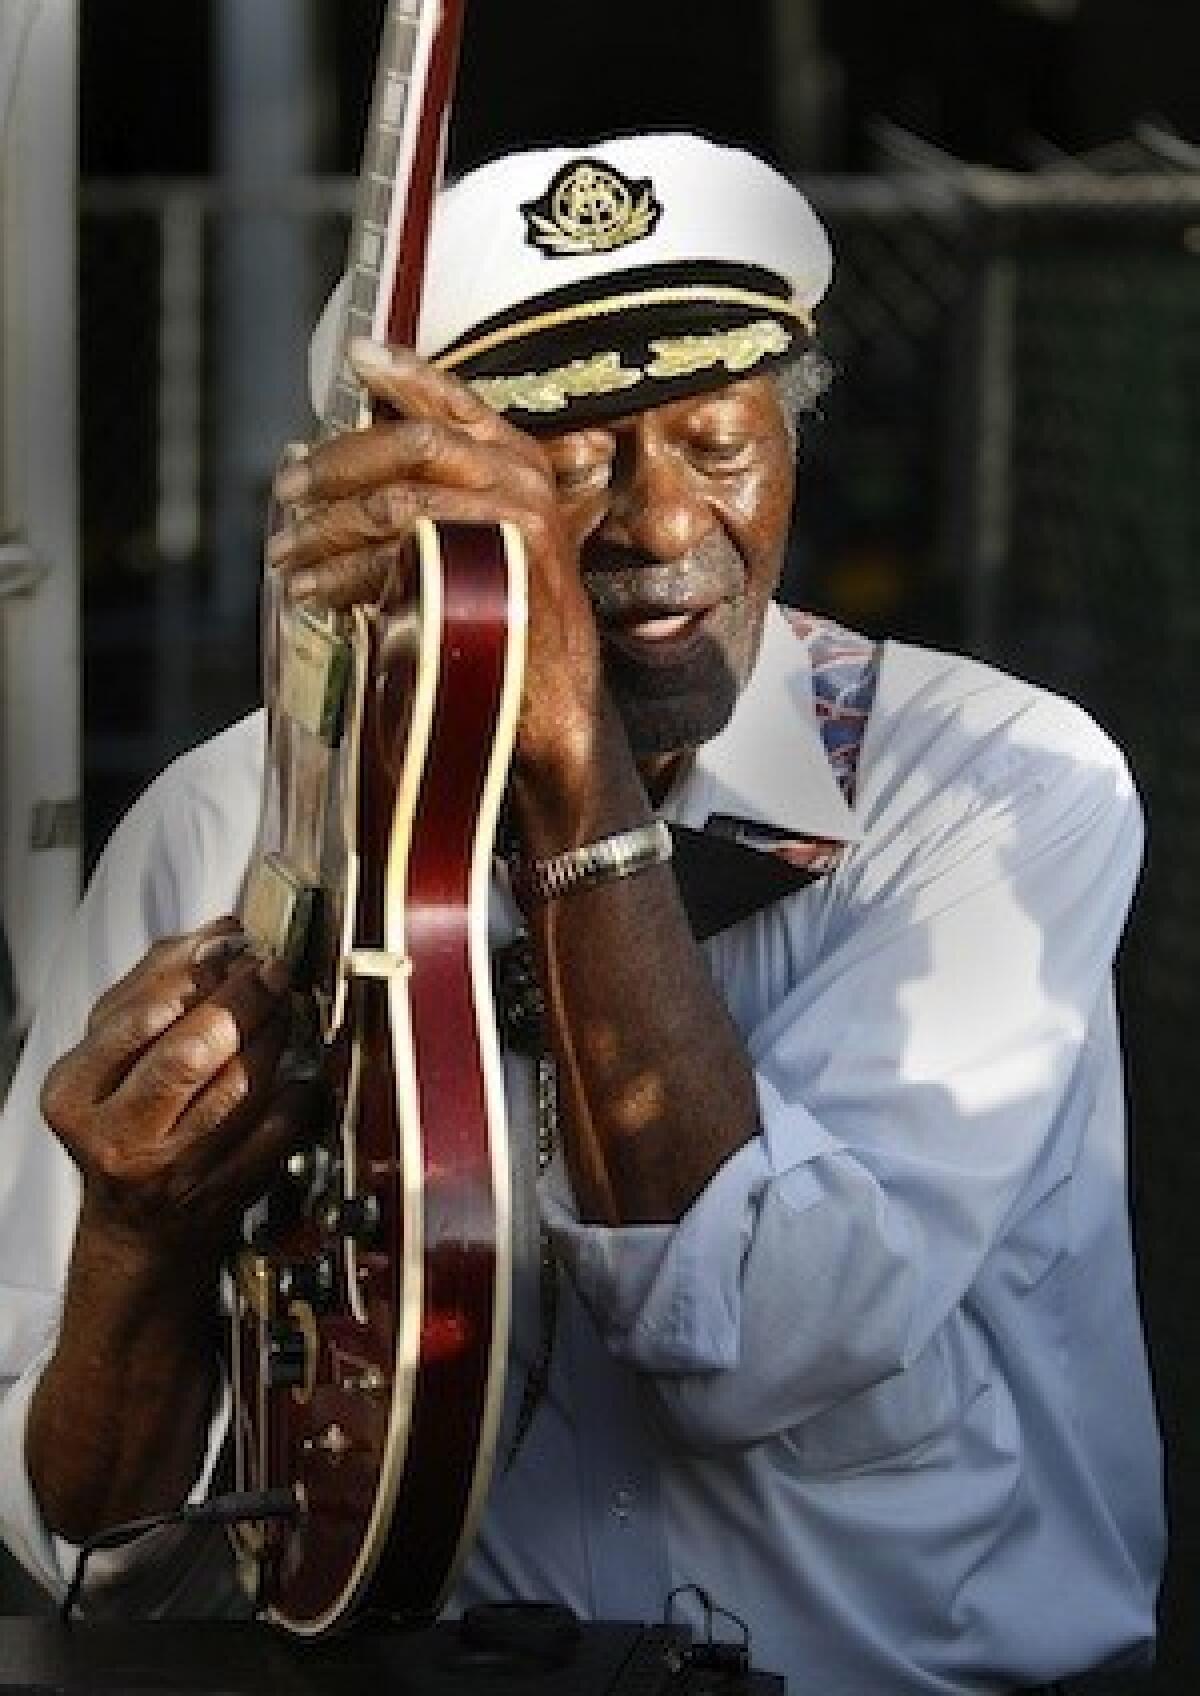 Rock legend Chuck Berry during a Southland visit to Irvine in 2010.